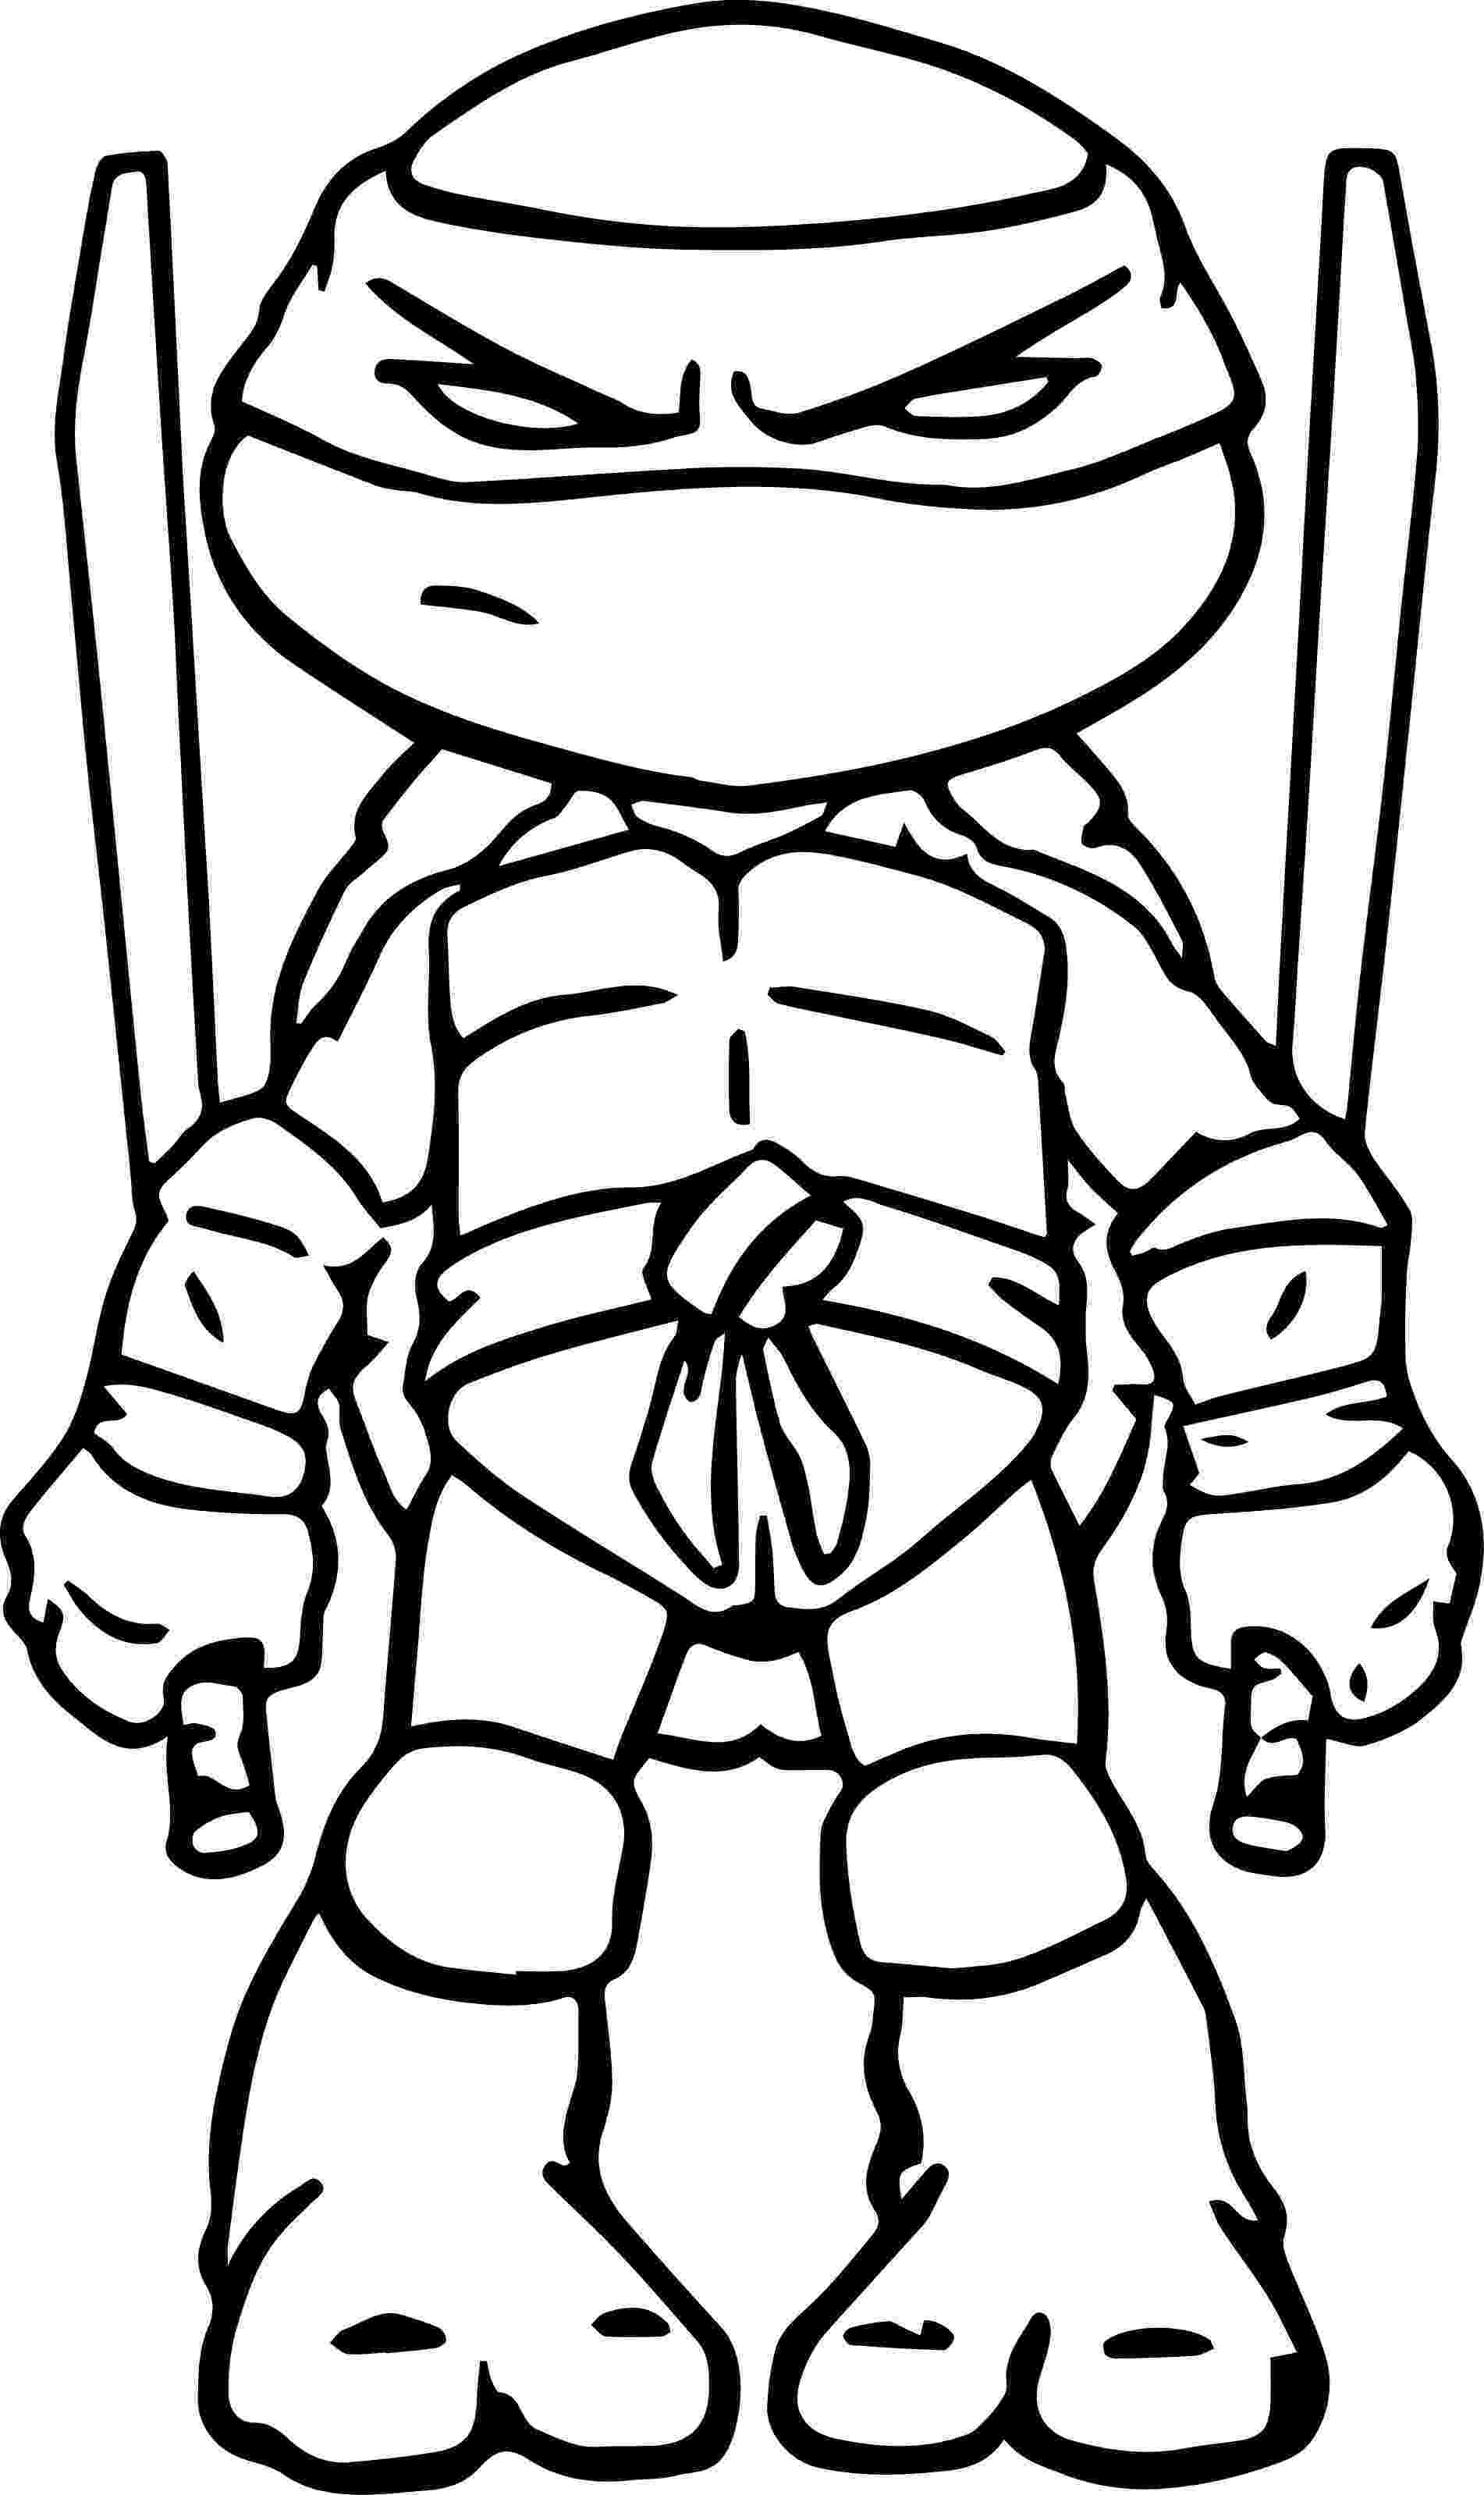 ninja turtle picture to color ninja turtle coloring pages free printable pictures to ninja color turtle picture 